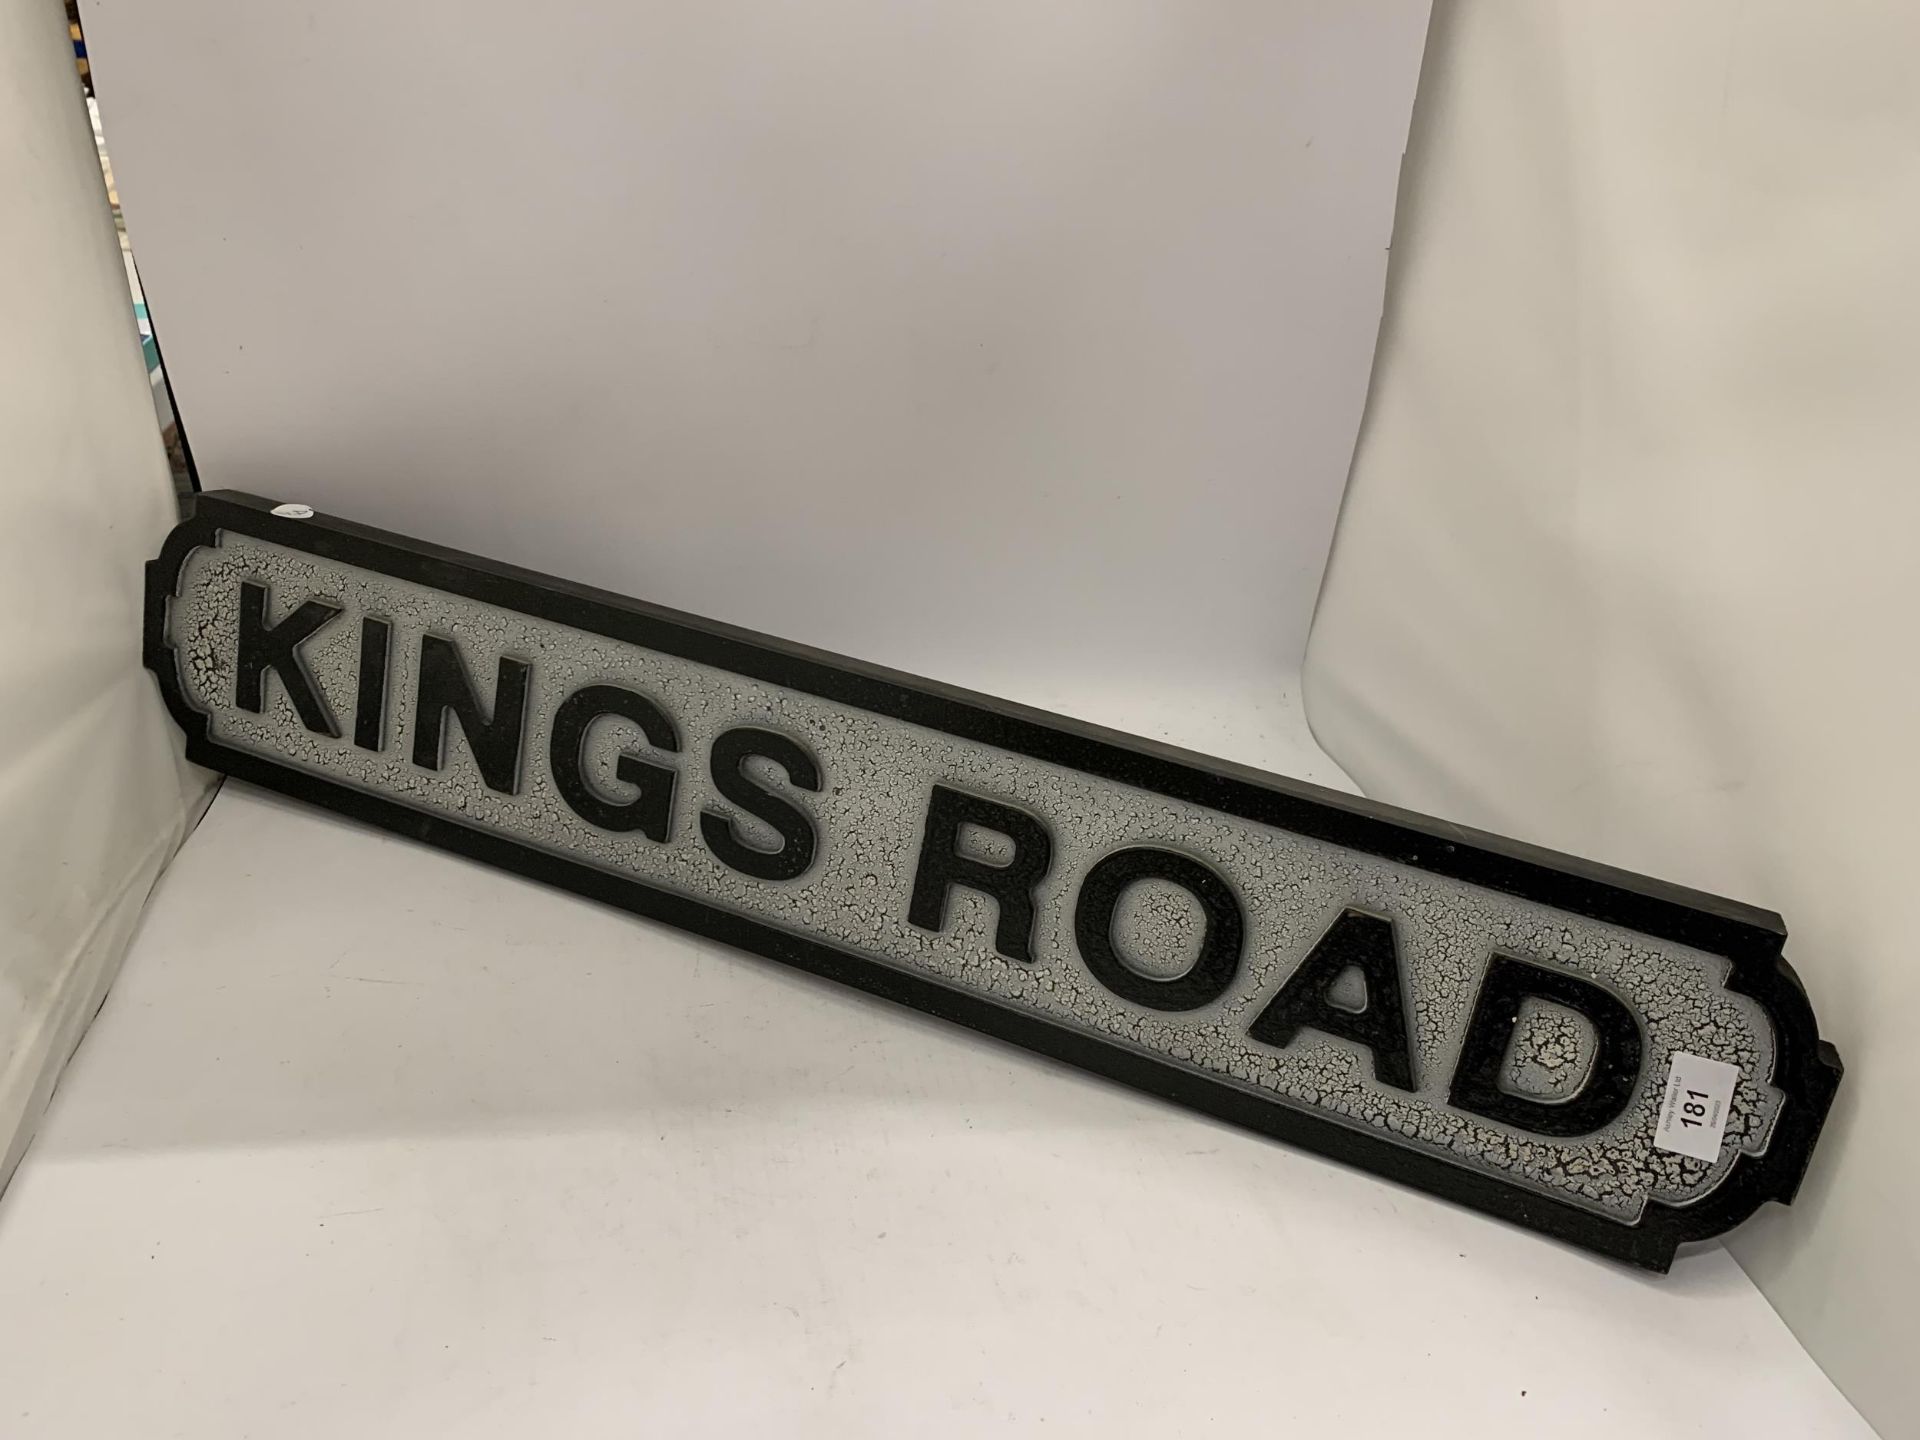 A LARGE KINGS ROAD WOODEN STREET SIGN